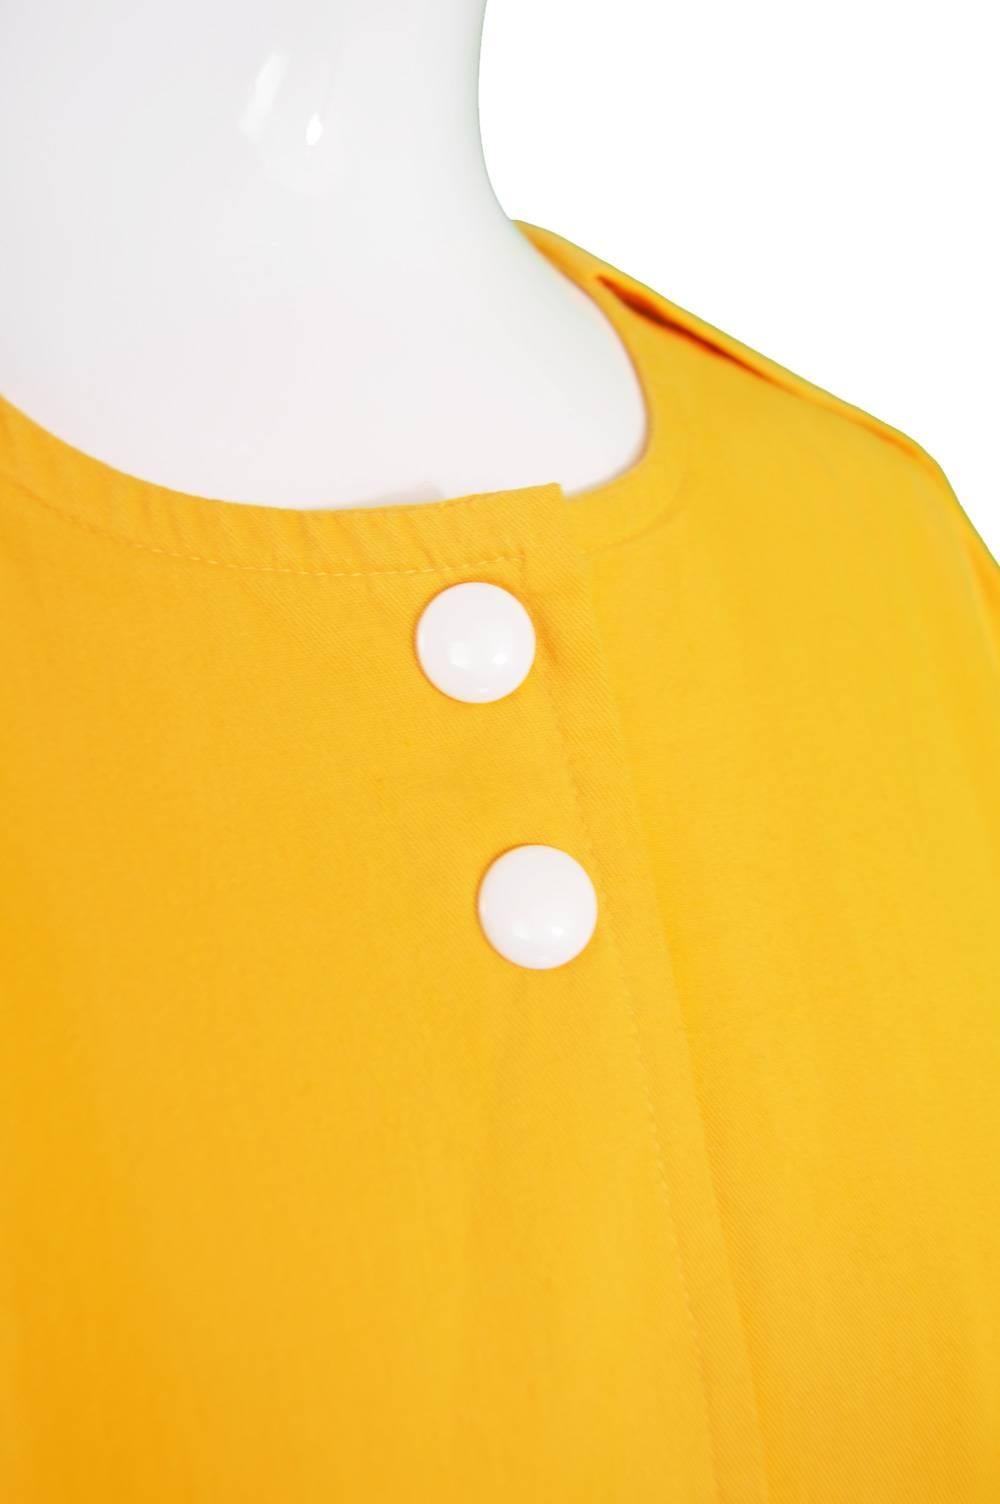 Pierre Cardin Mustard Yellow Dress with Oversized Patch Pockets, 1980s 1